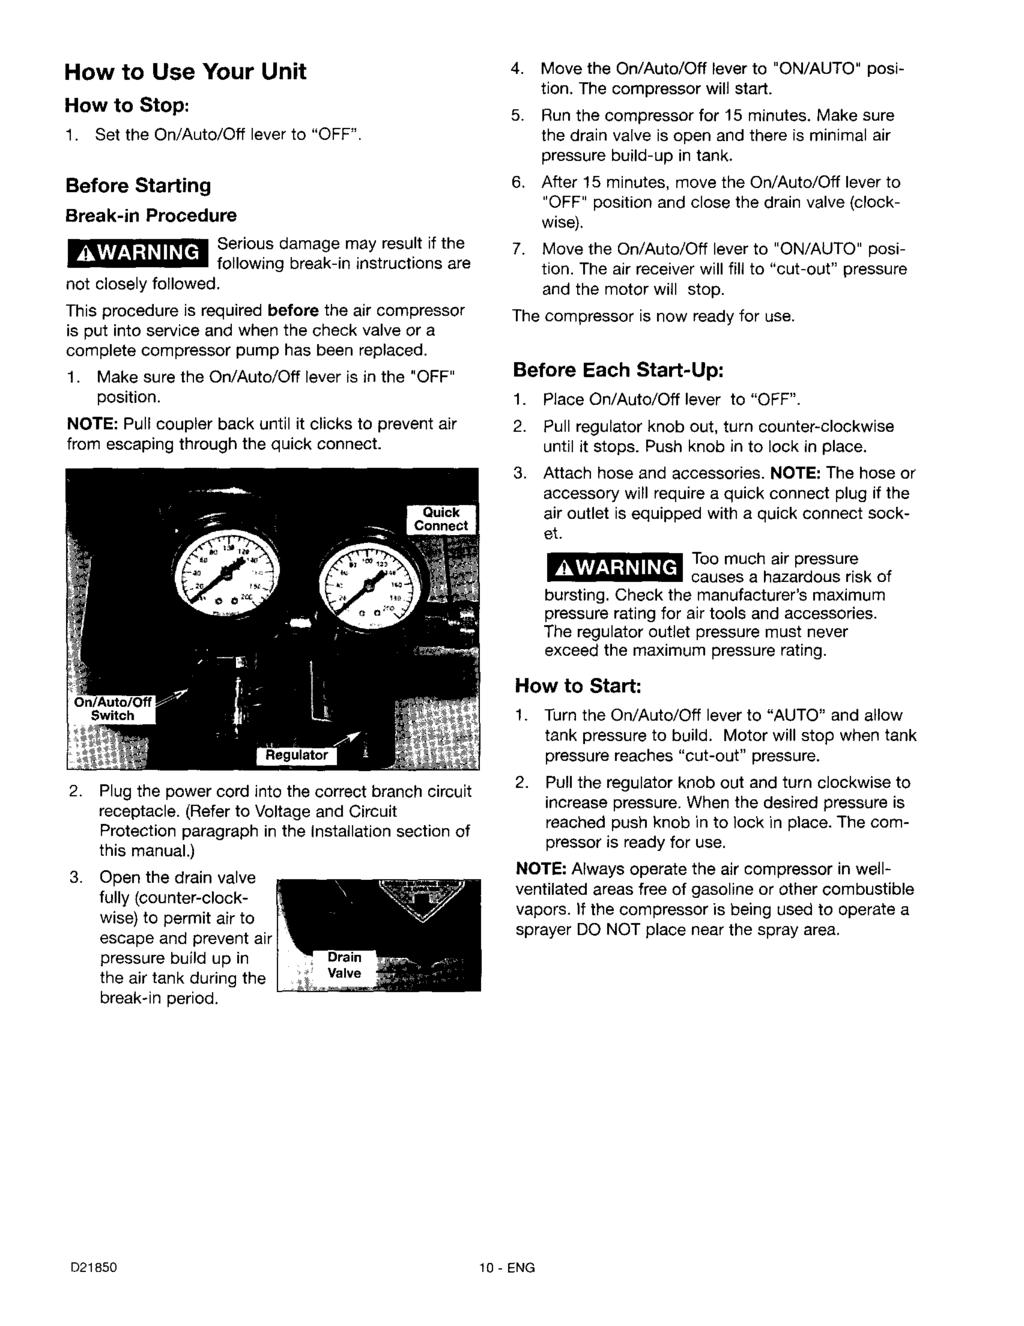 How to Use Your Unit How to Stop: 1. Set the On/Auto/Off lever to "OFF". Before Break-in Starting Procedure Serious damage may result if the following break-in instructions are not closely followed.